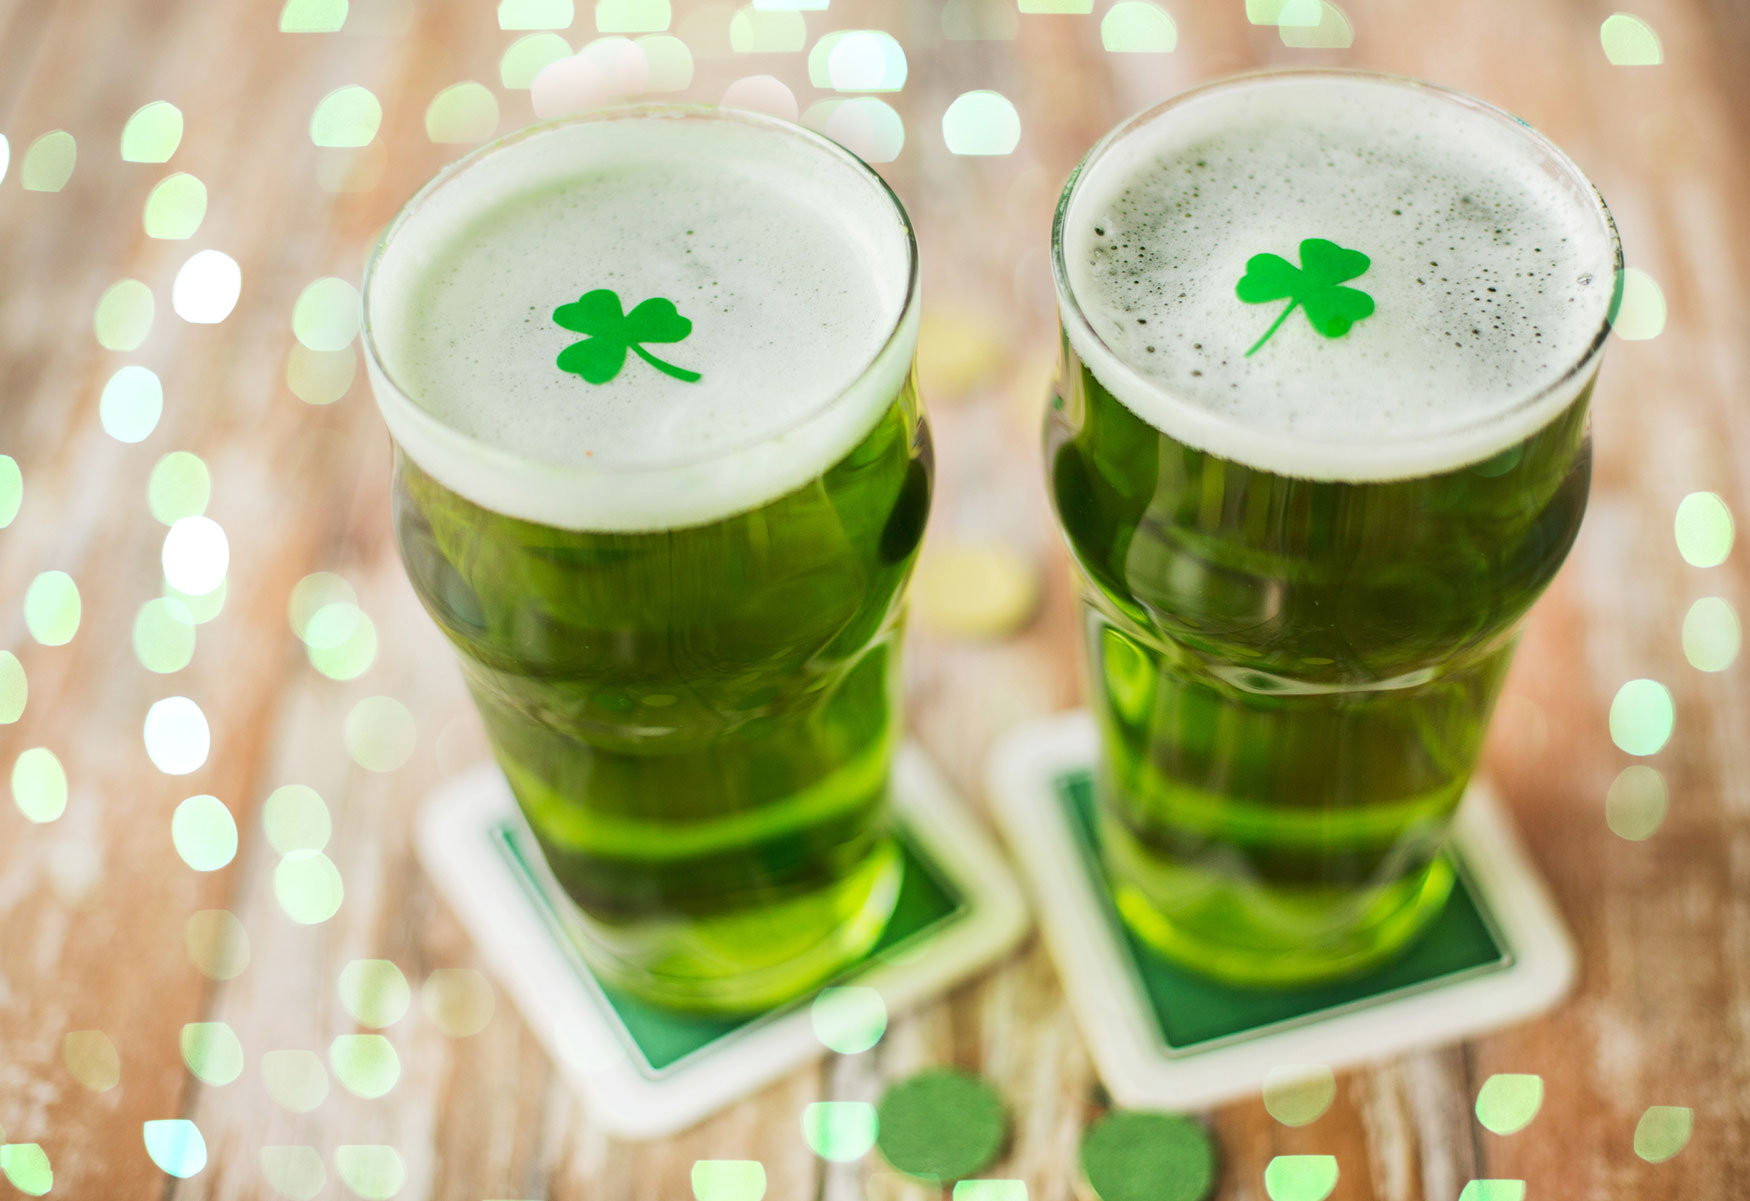 Get Lucky! Find New Prospects at Our Free Happy Hour & Networking Event